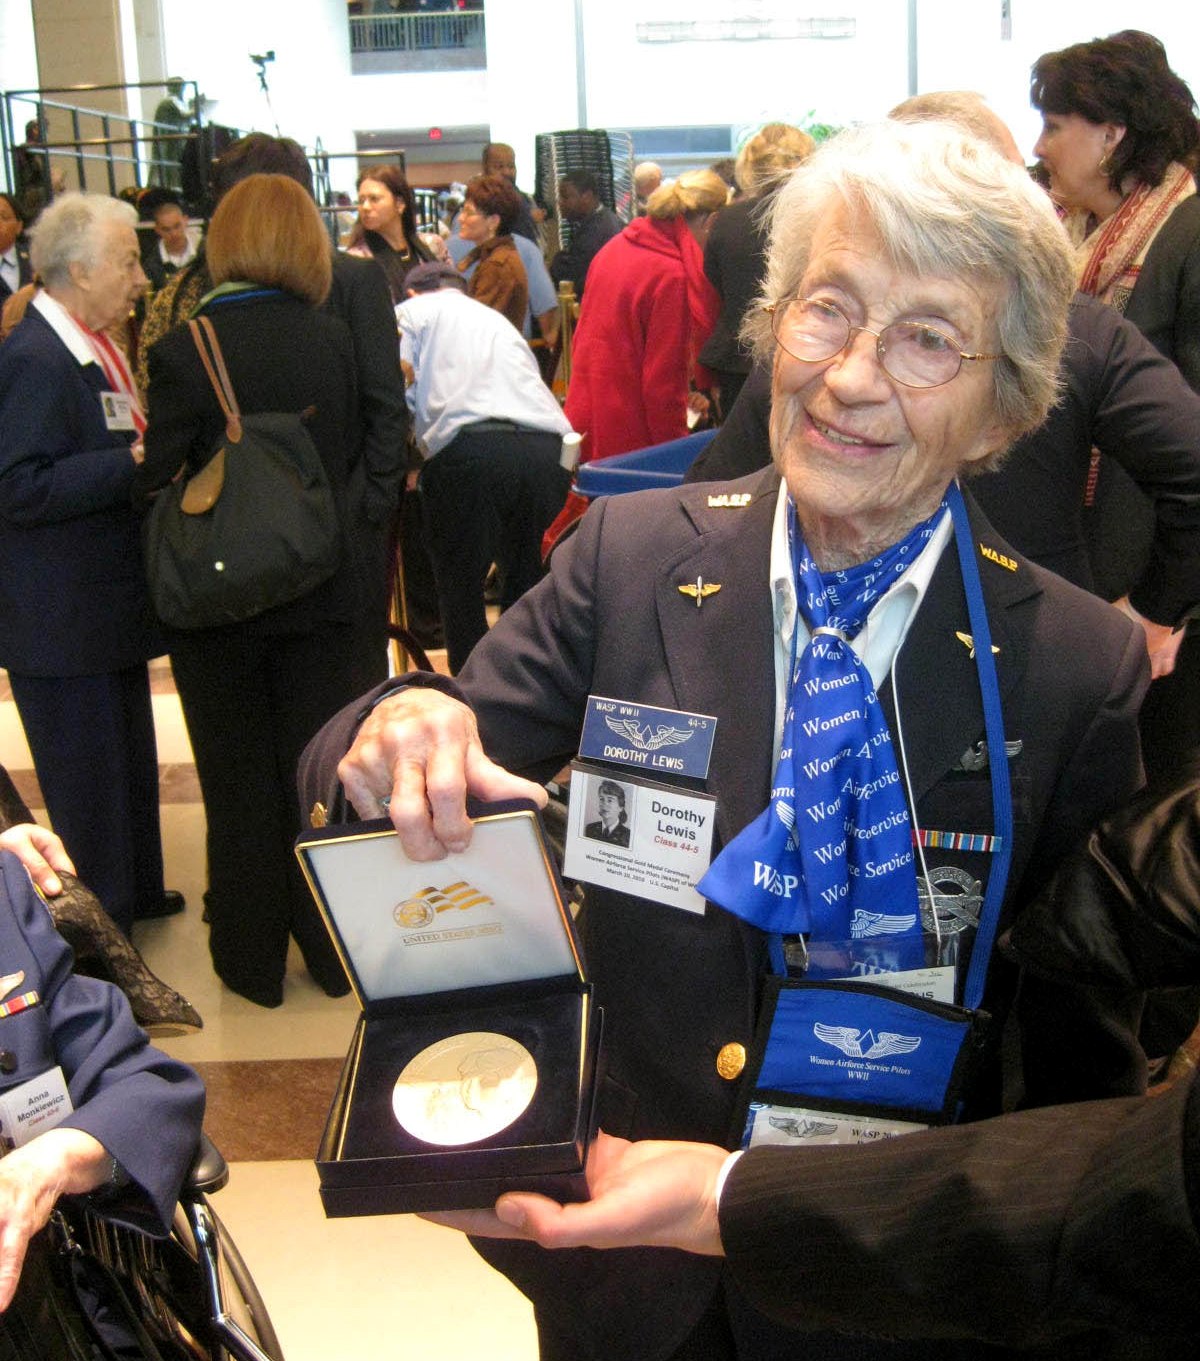 Dot getting the Congressional Gold Medal - March 10, 2010